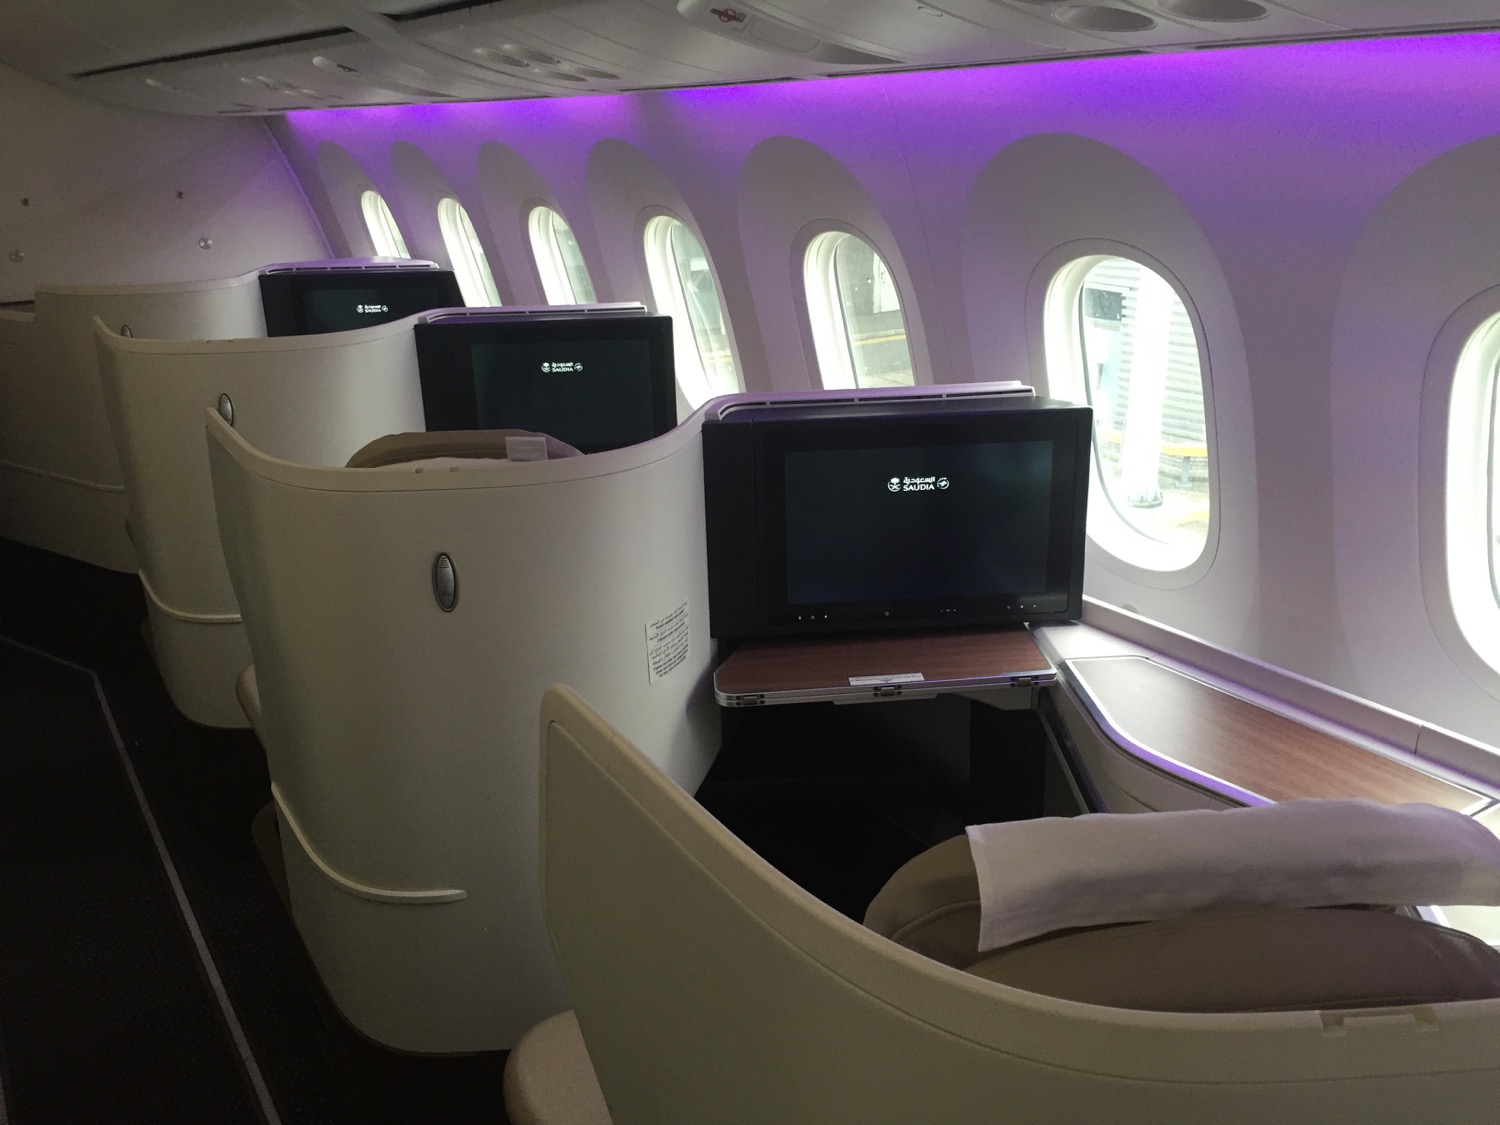 A row of seats with a TV on the side